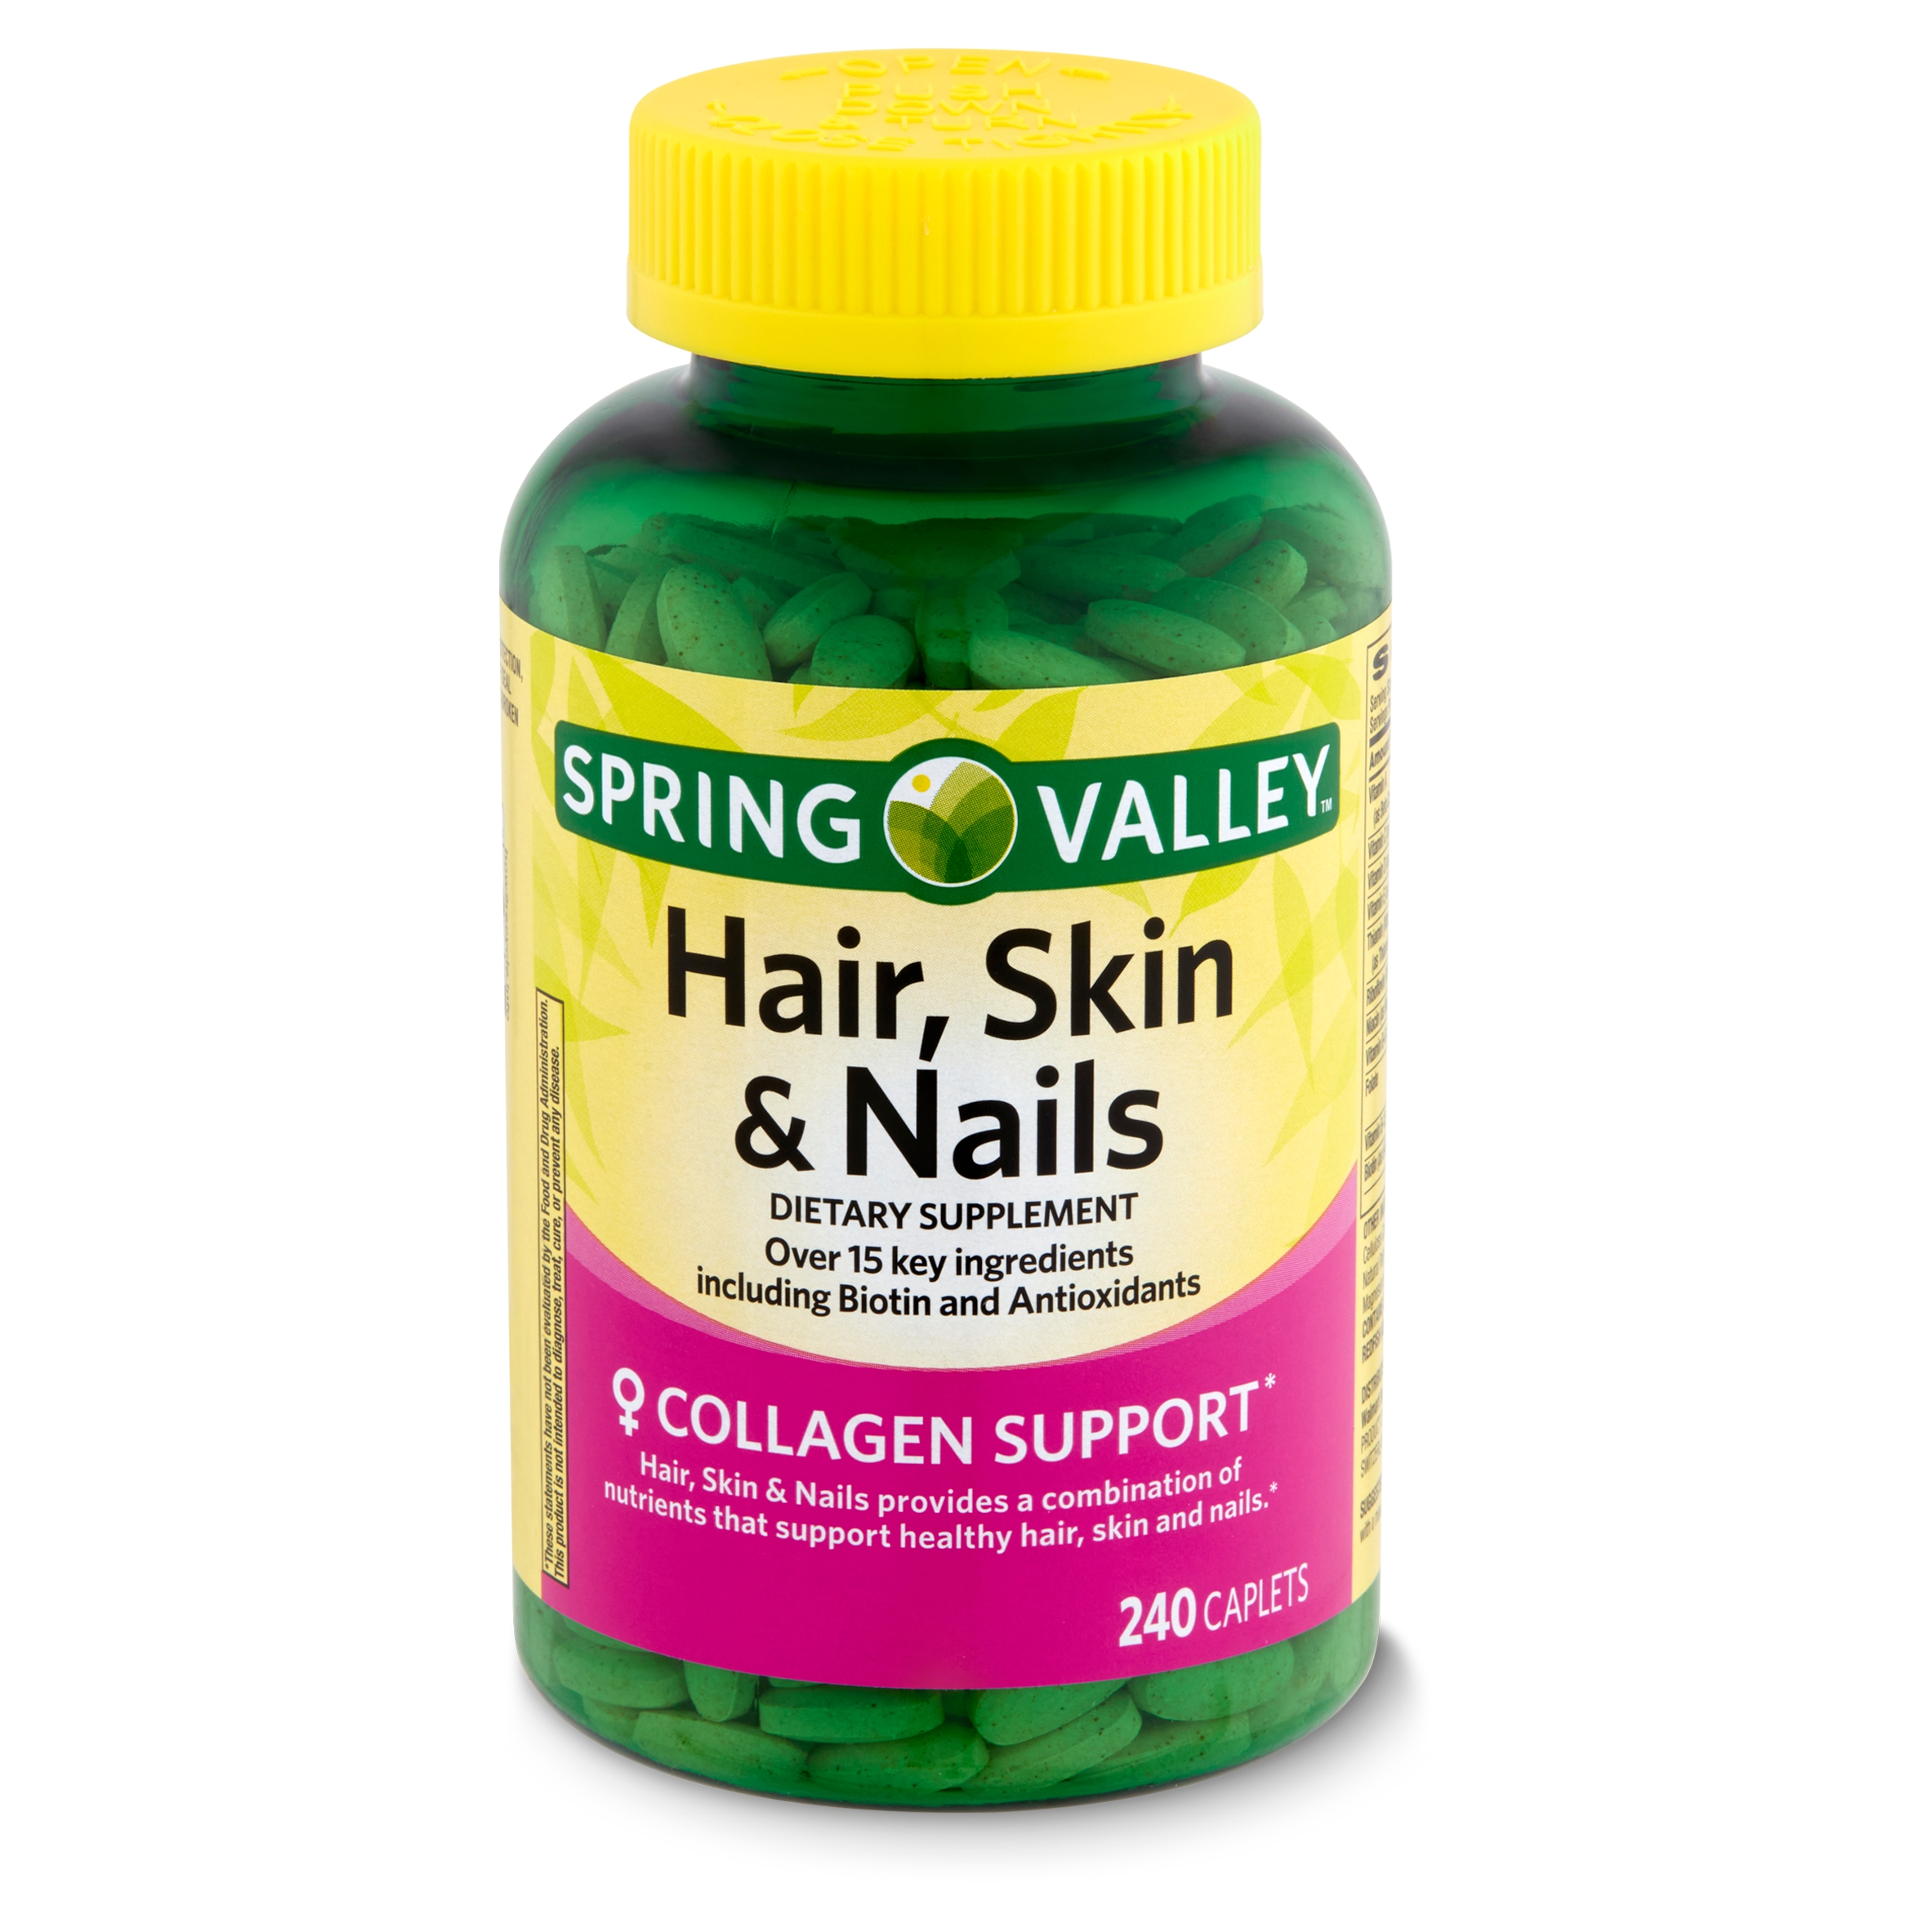 Spring Valley Hair, Skin & Nails Dietary Supplement, 240 Caplets - image 1 of 9